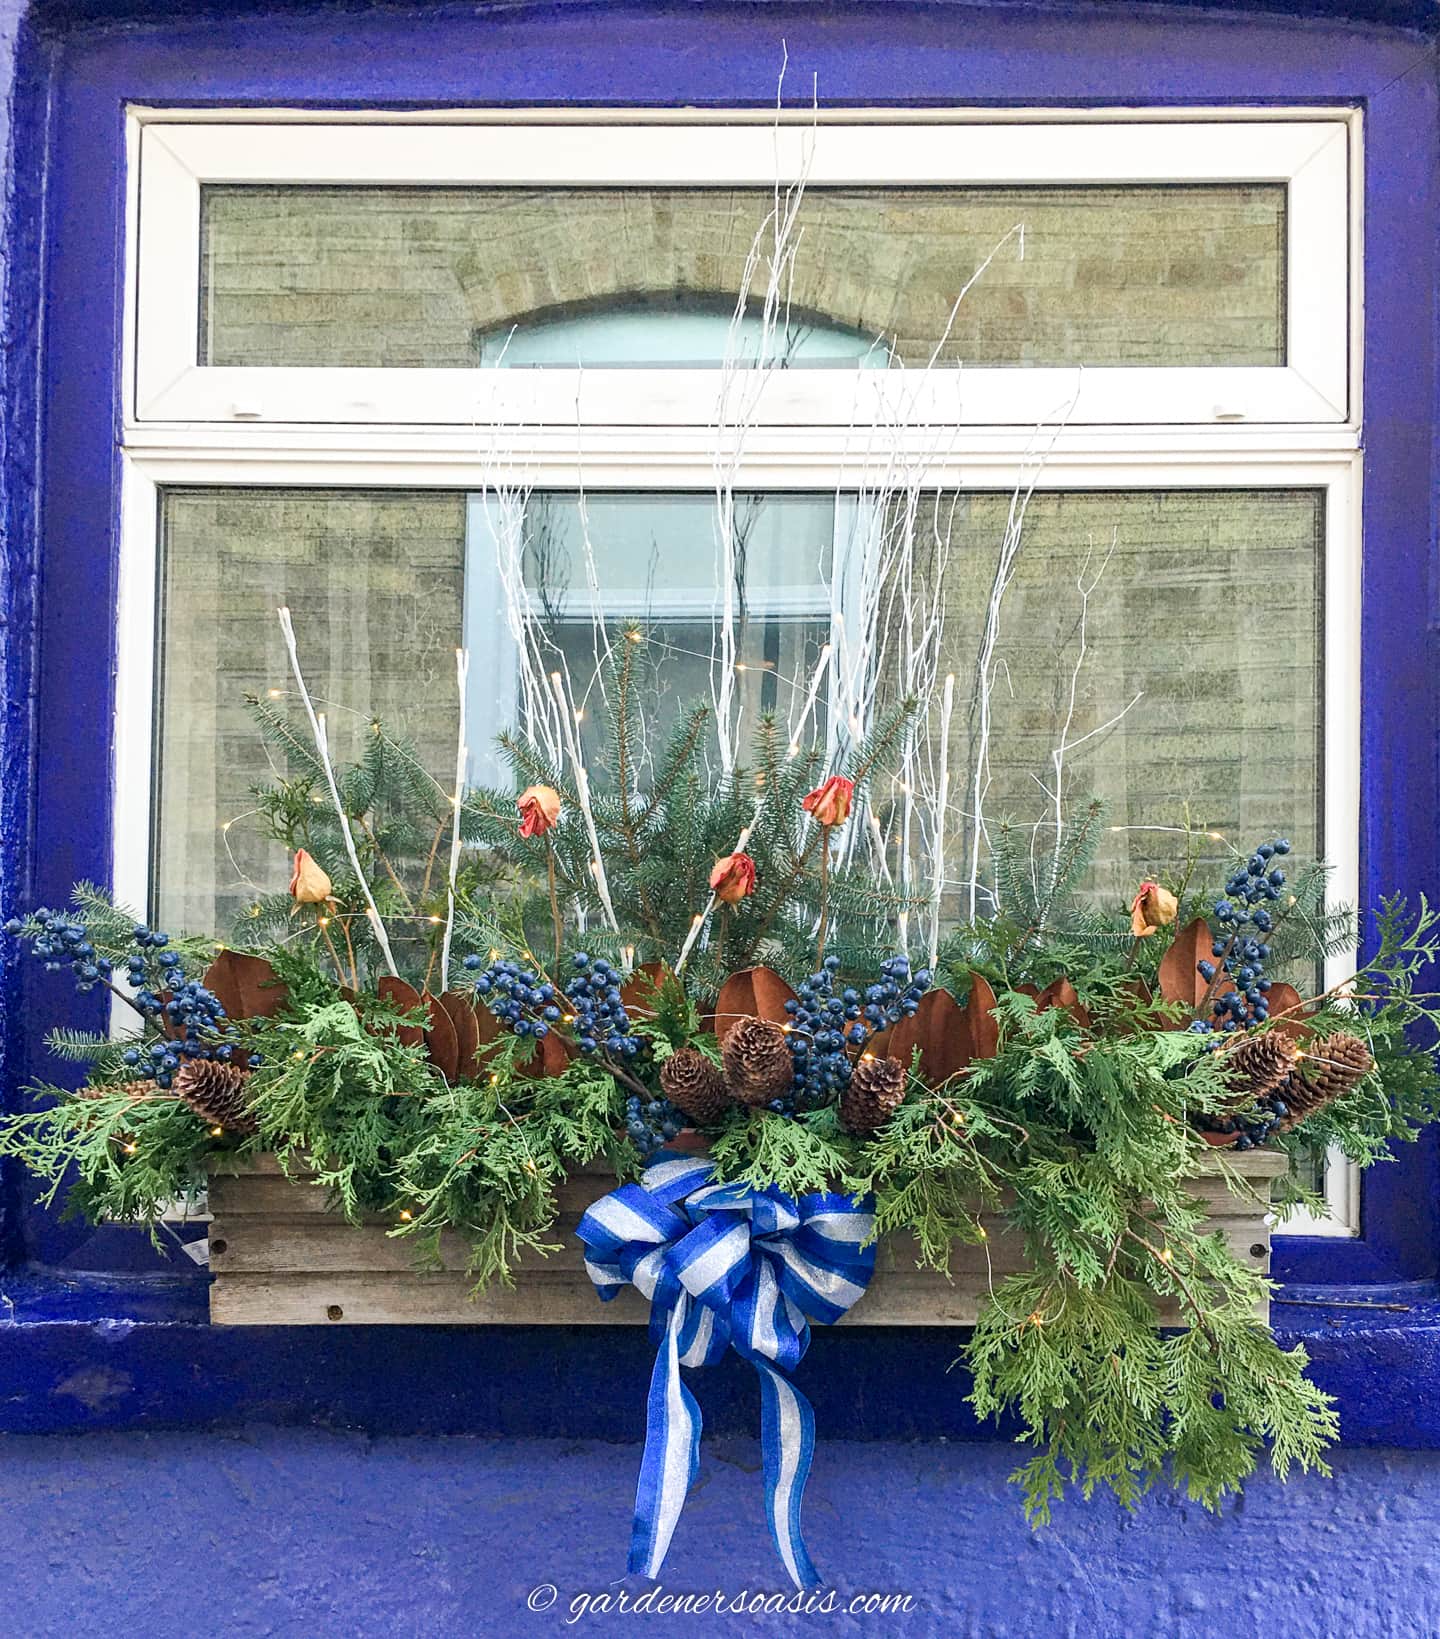 An evergreen-studded window box decorated with pine cones, berries, and a bow